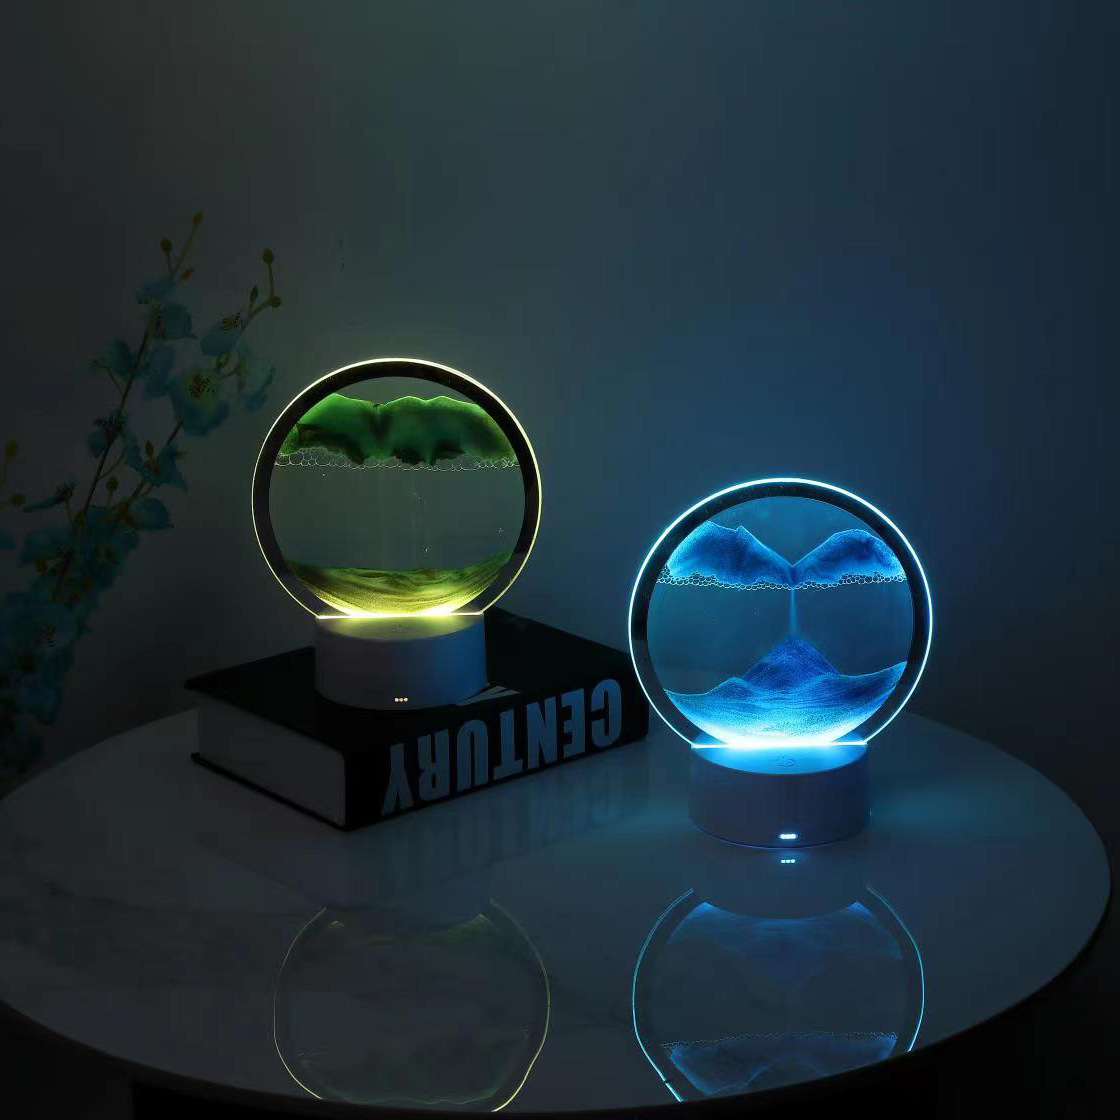 Sand Lamp Dynamic Quick 3D Lamp LED Flowing Sand Painting Picture Art Table Lamp Flow Sand Painting RGB7/RGB16 Room Decor